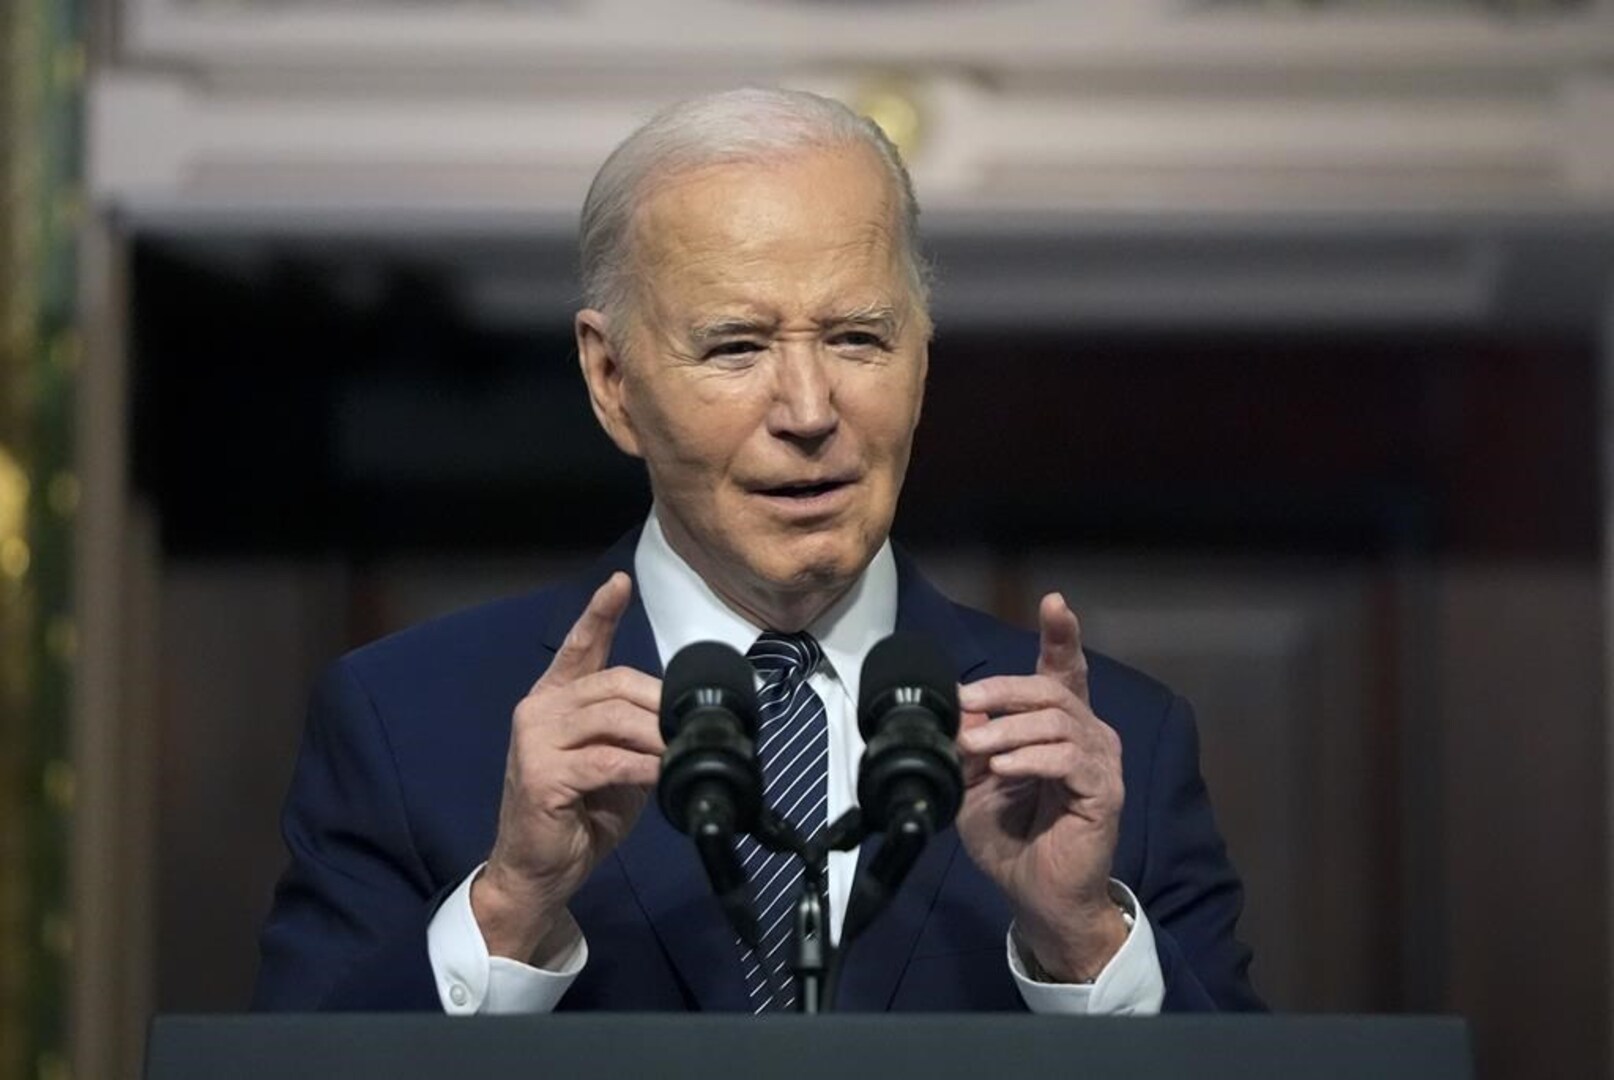 Biden reaches out to veterans on Memorial Day